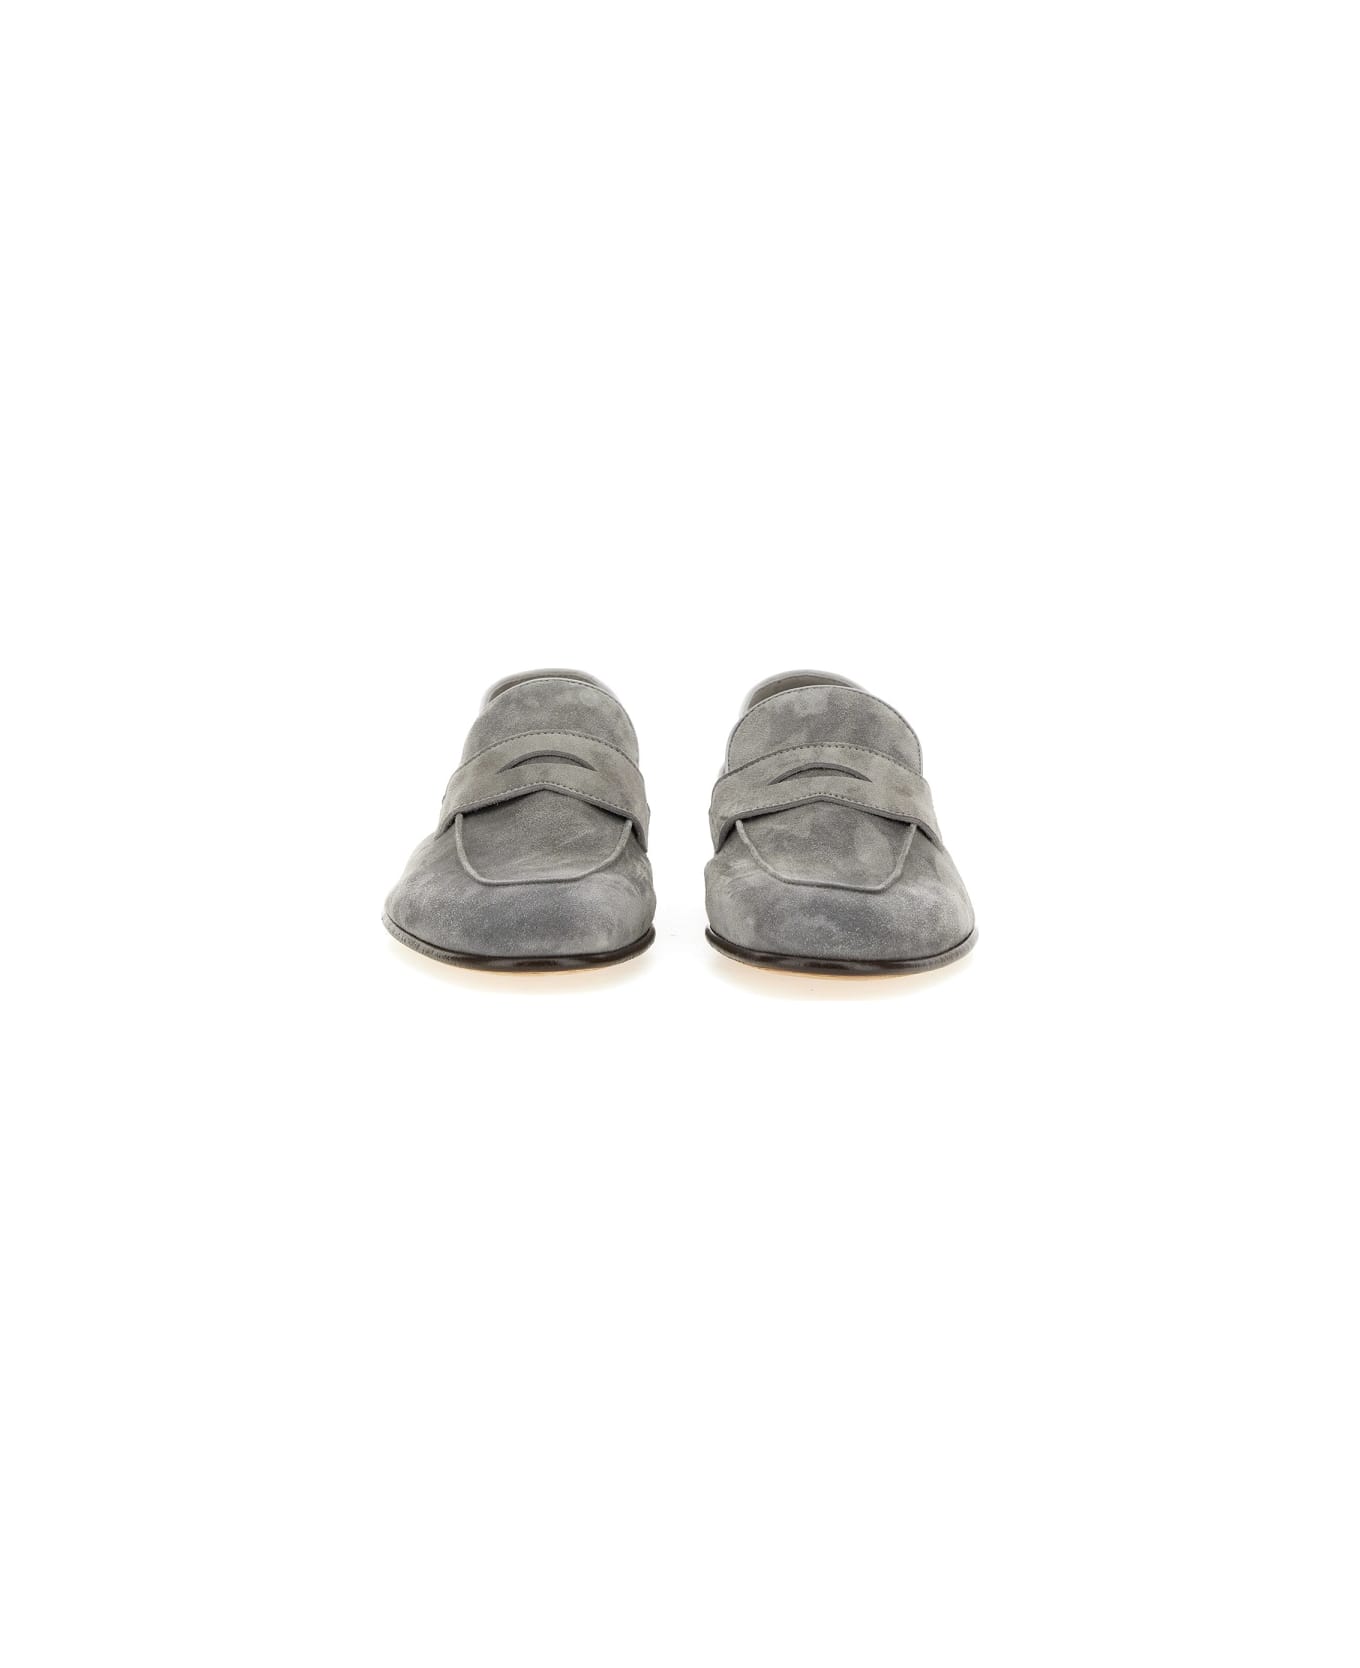 Brunello Cucinelli Penny Loafer - GREY